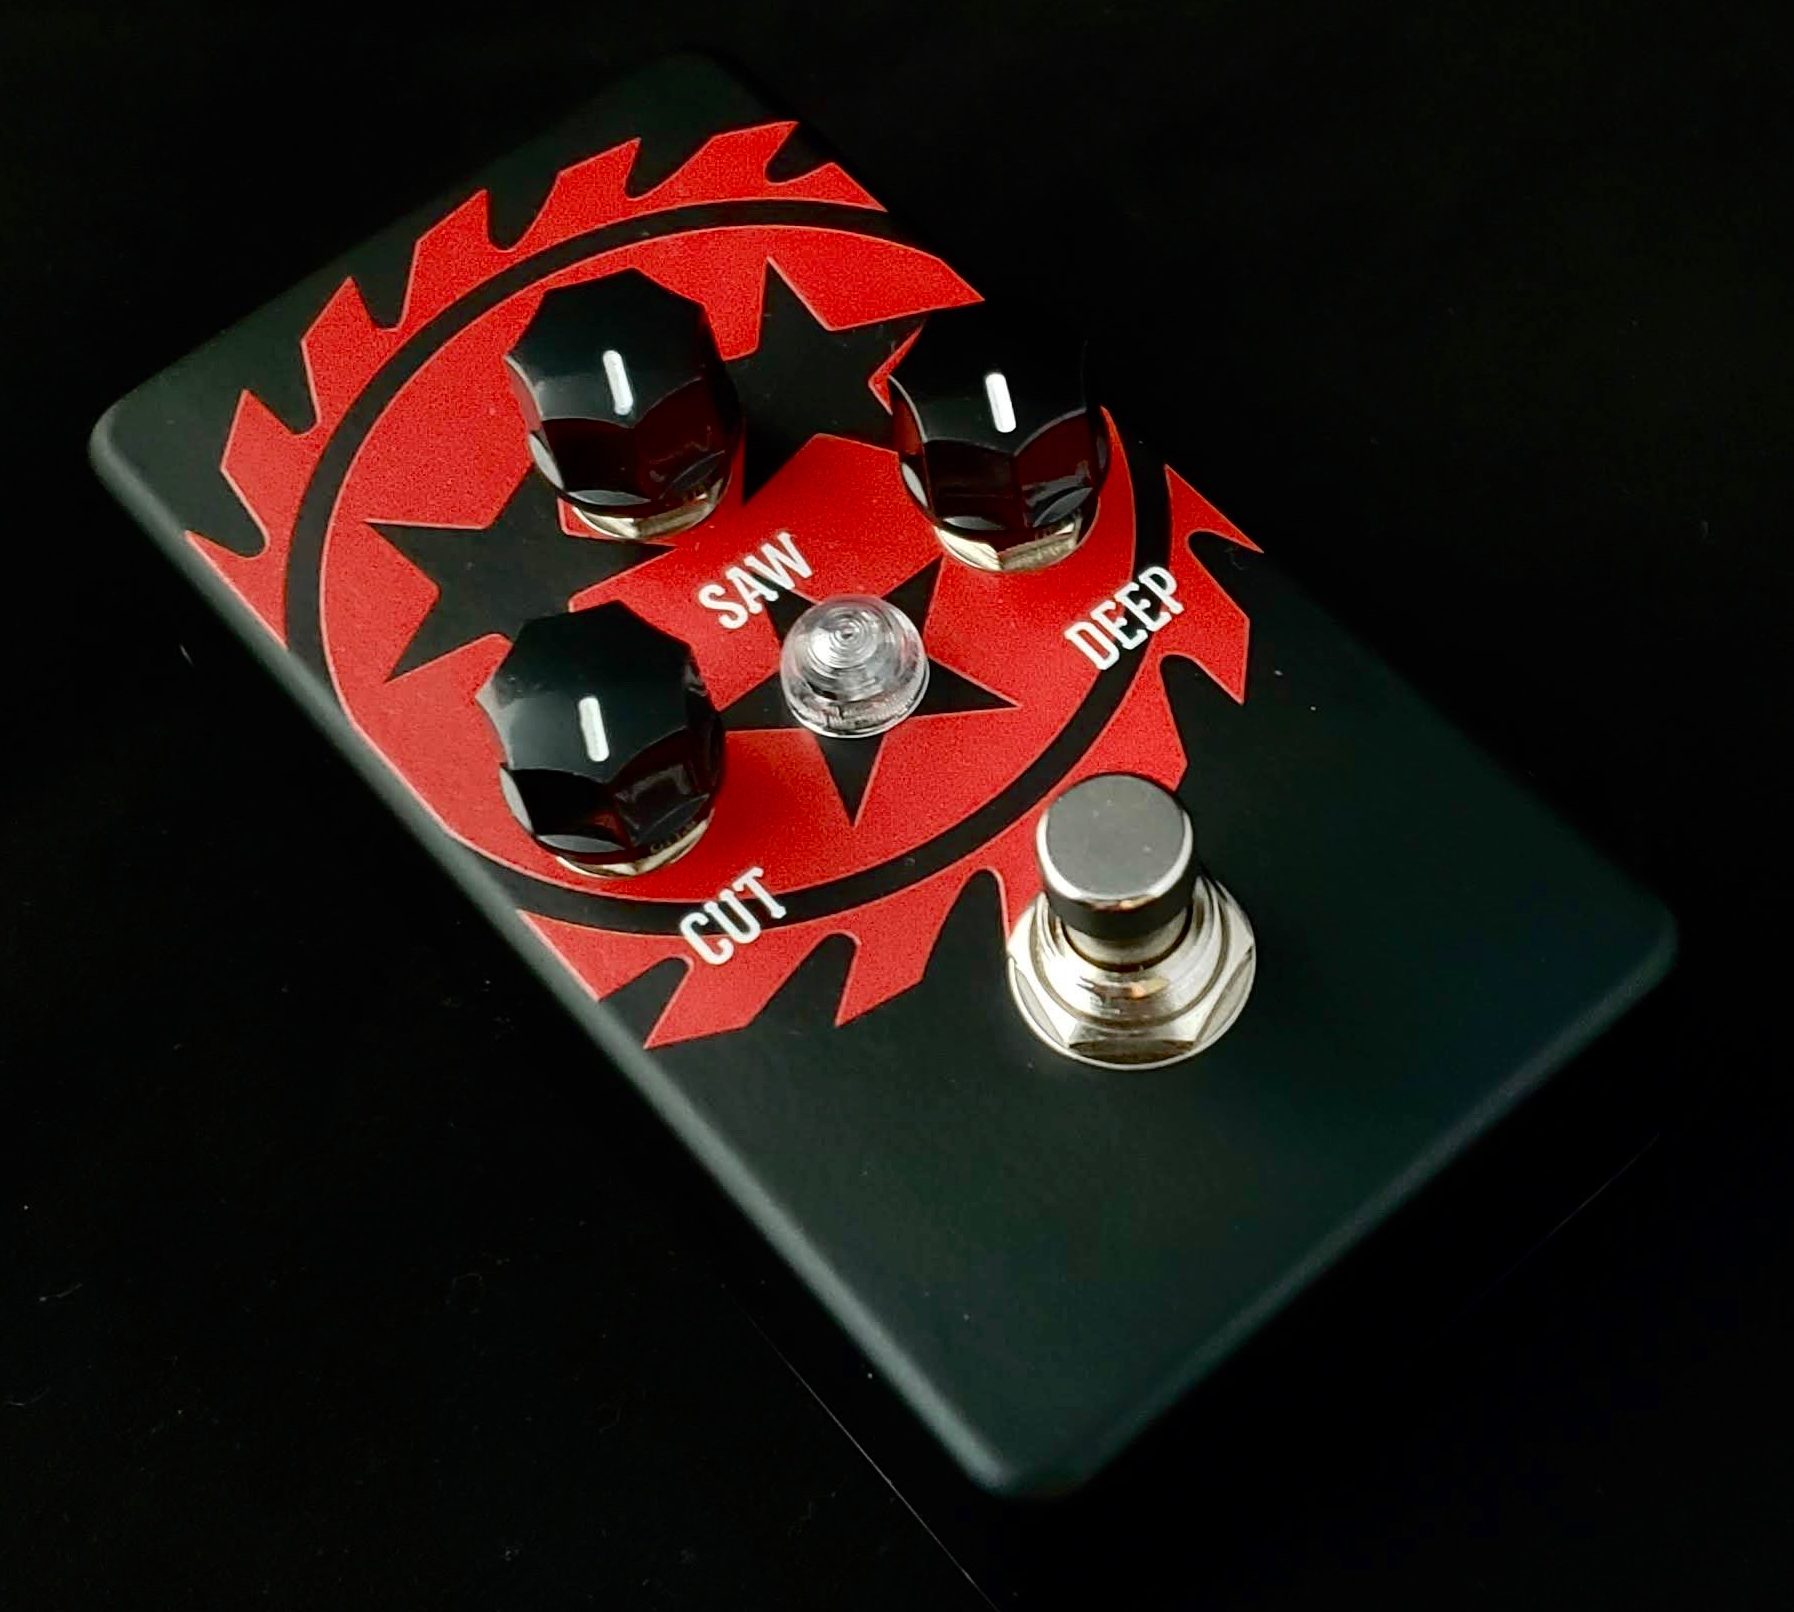 Fortin Amps Whitechapel Blade Boost Signature Pedal - Volume/boost/expression effect pedaal - Variation 1